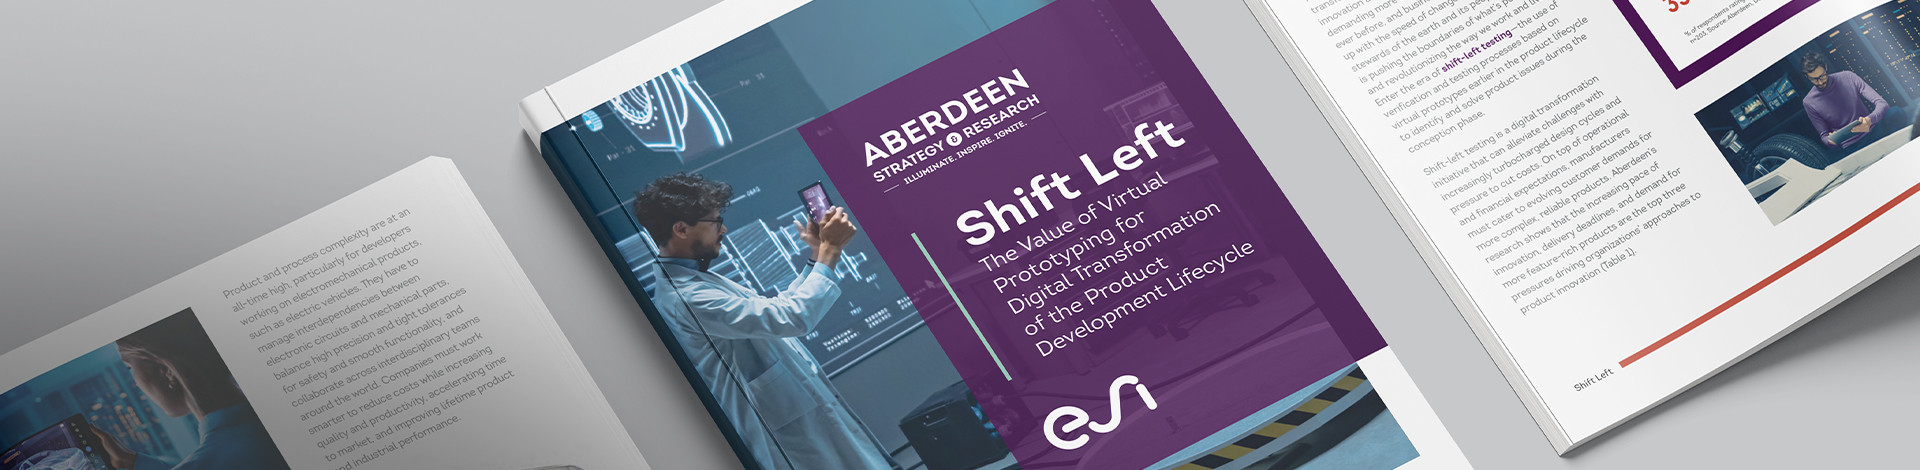 Shift Left -  The Value of  Virtual Prototyping  View the eBook